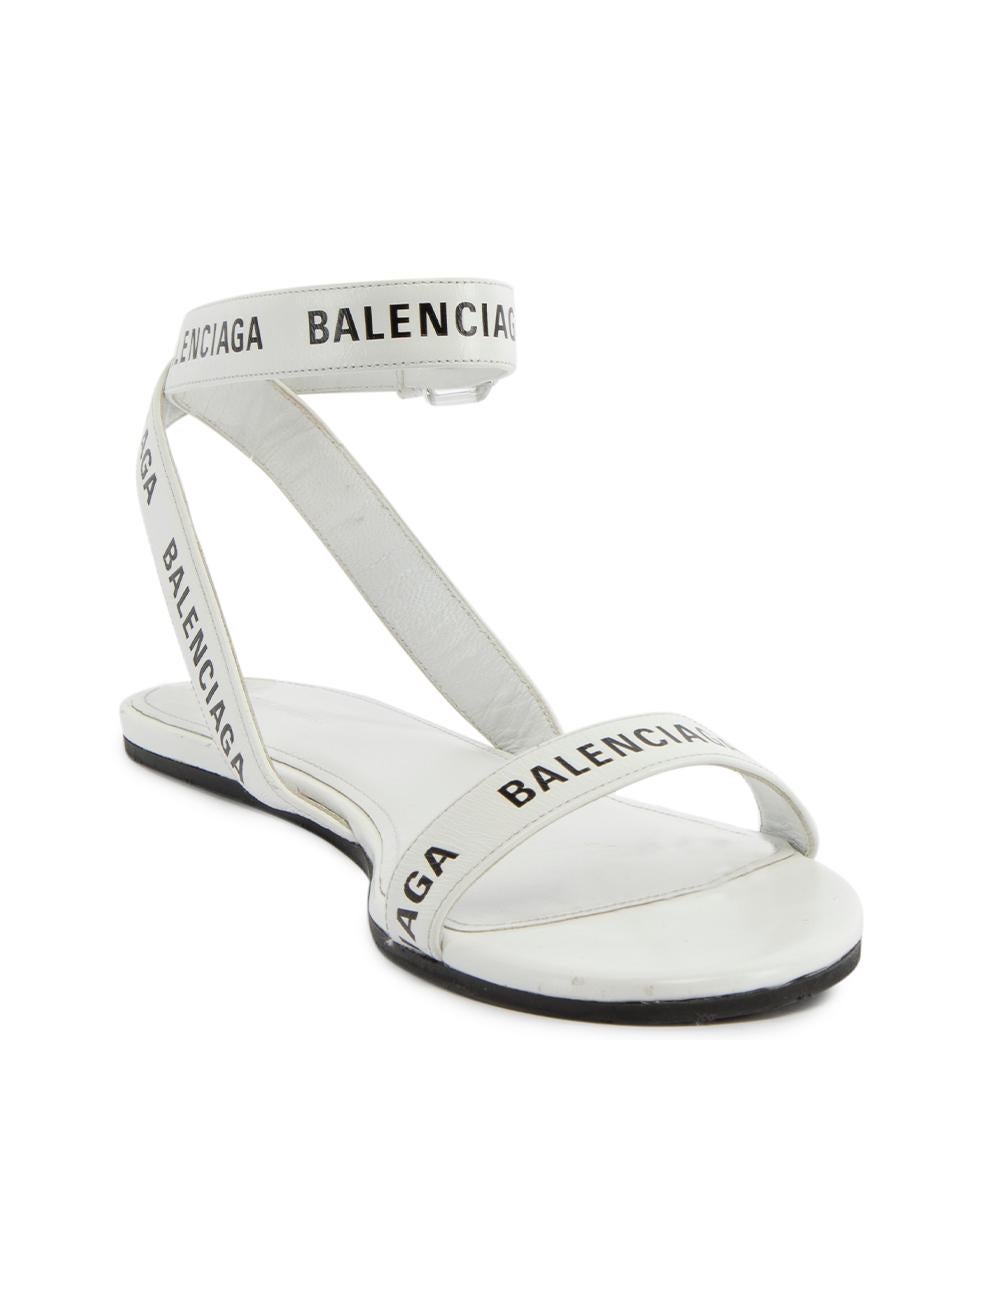 CONDITION is Very good. Minimal wear to sandals is evident. Indents and scratches can be seen on the back of heels of this used Balenciaga designer resale item. Details White Leather Sandals Flat heel Open toe Balenciaga logo straps Ankle strap